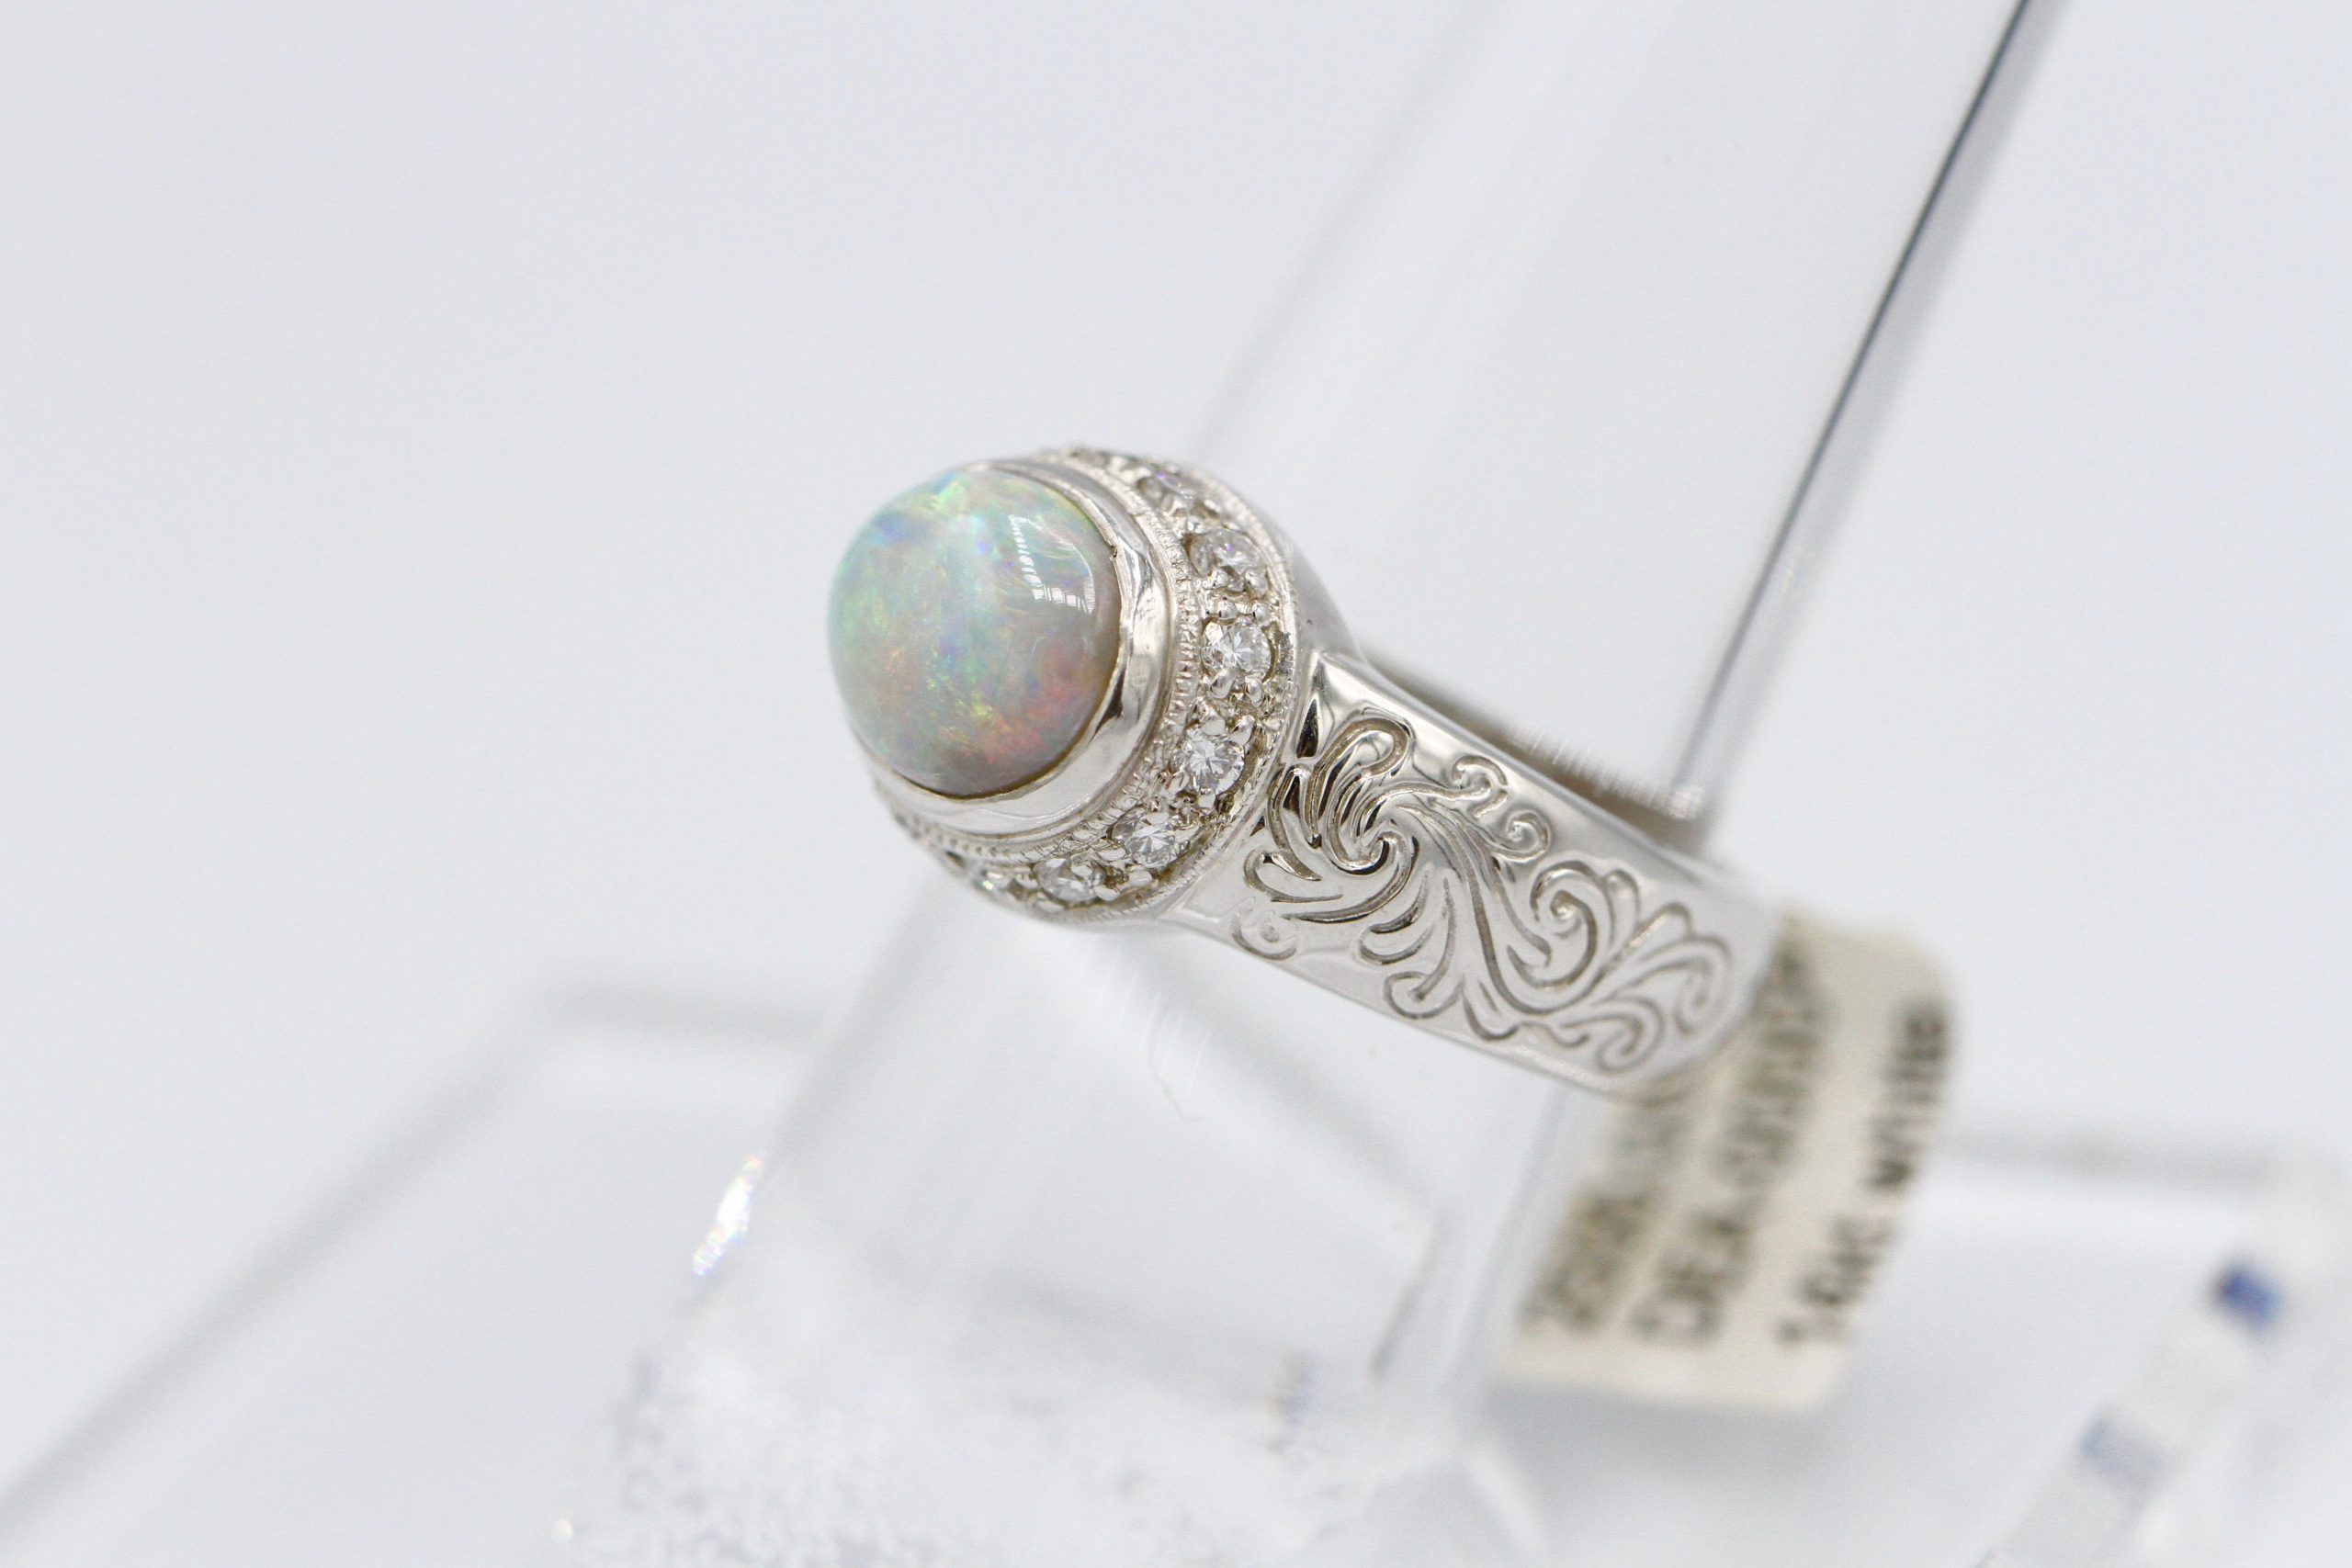 A ring with a large, multi-color gemstone